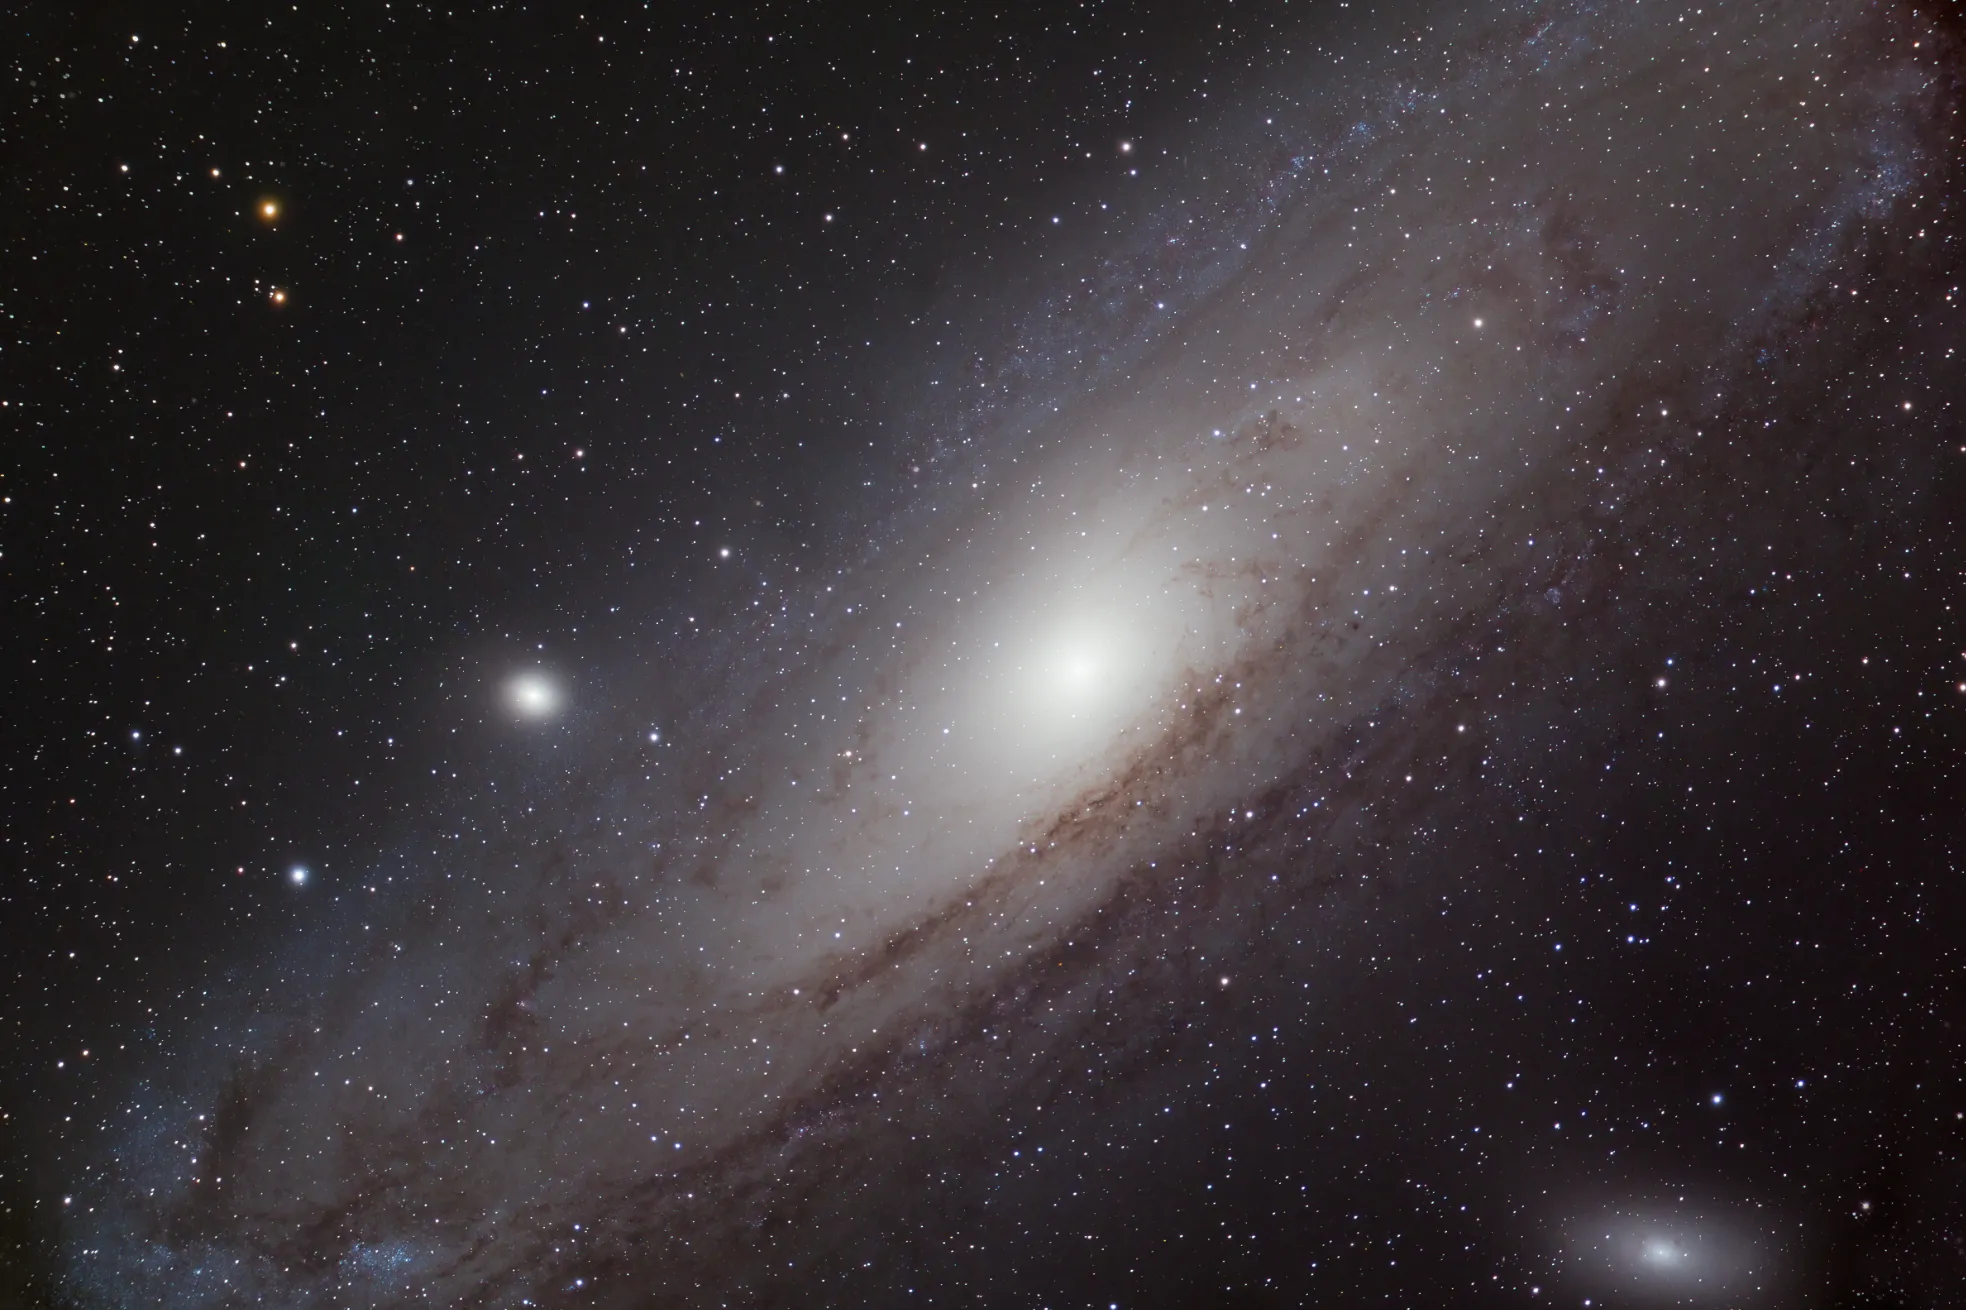 Andromeda Galaxy astrophoto taken in just 15 minutes by Richard Harris at Ozark Hills Observatory